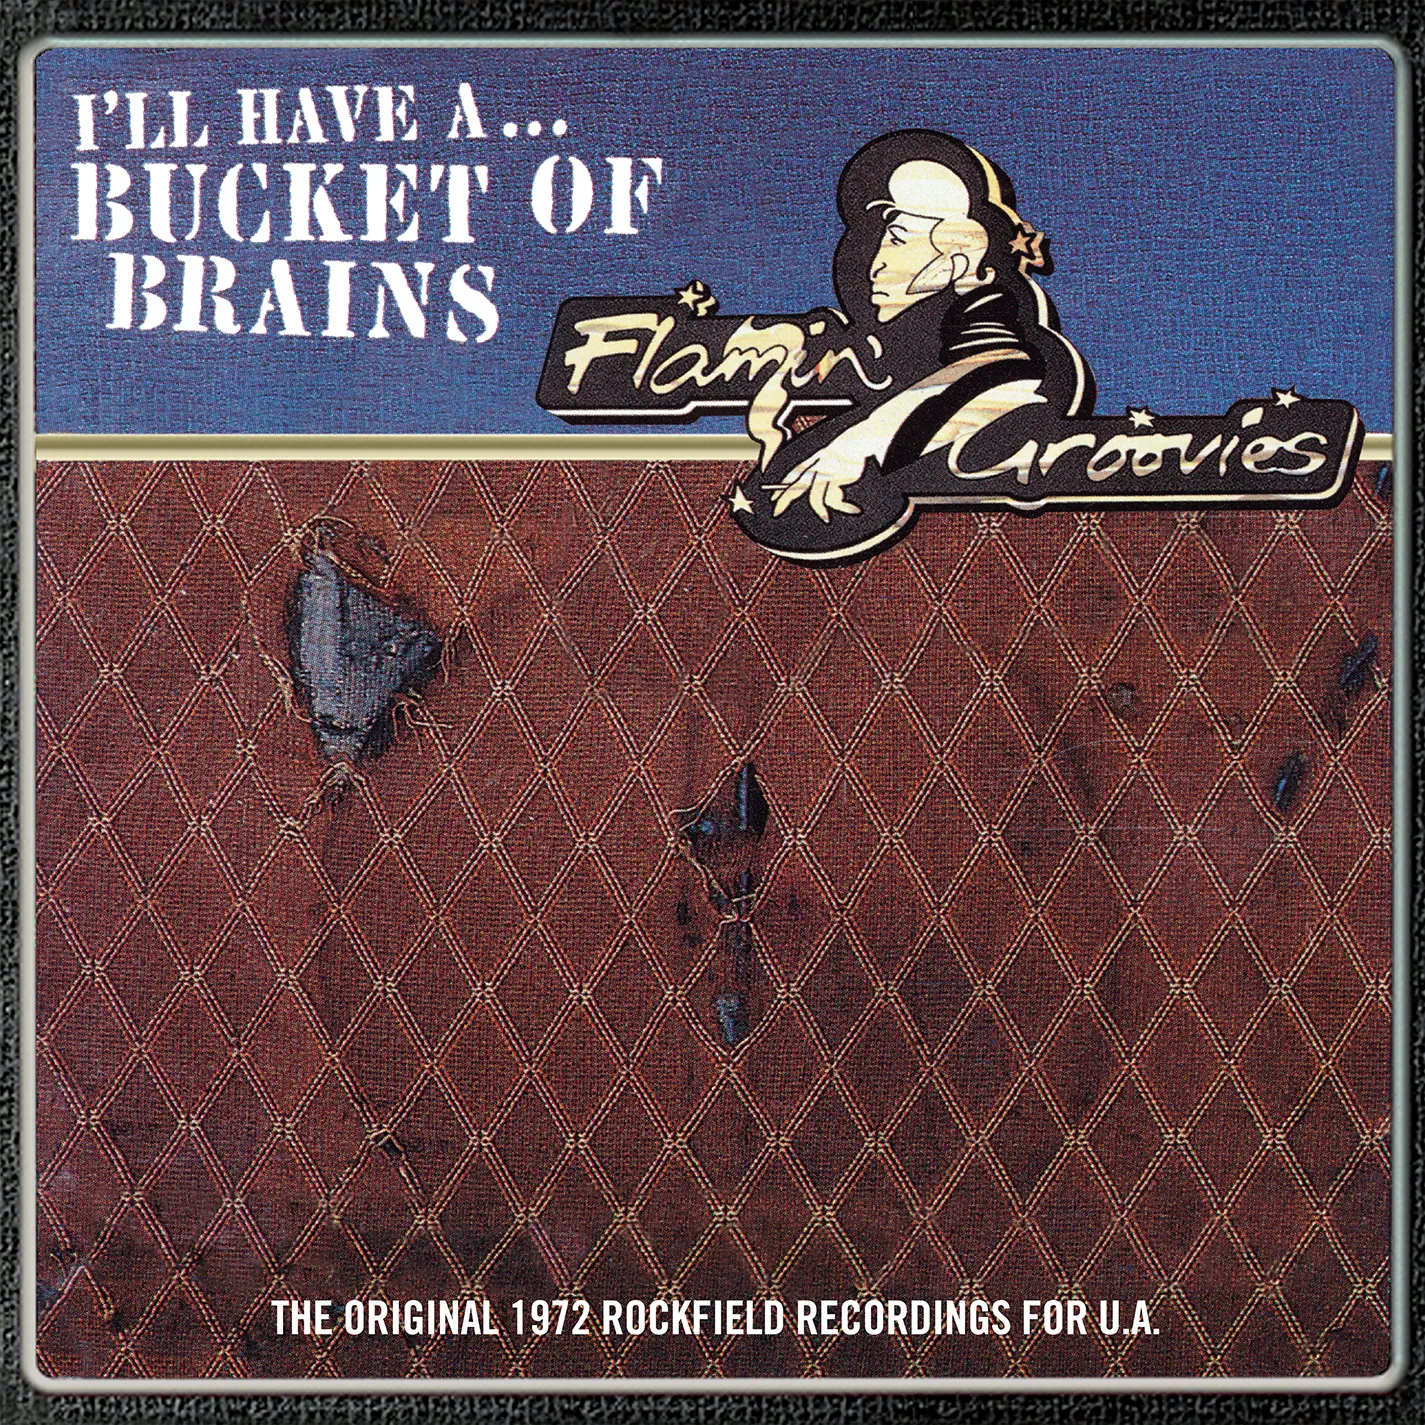 The Flamin' Groovies - Bucket of Brains [RSD Drops 2021]